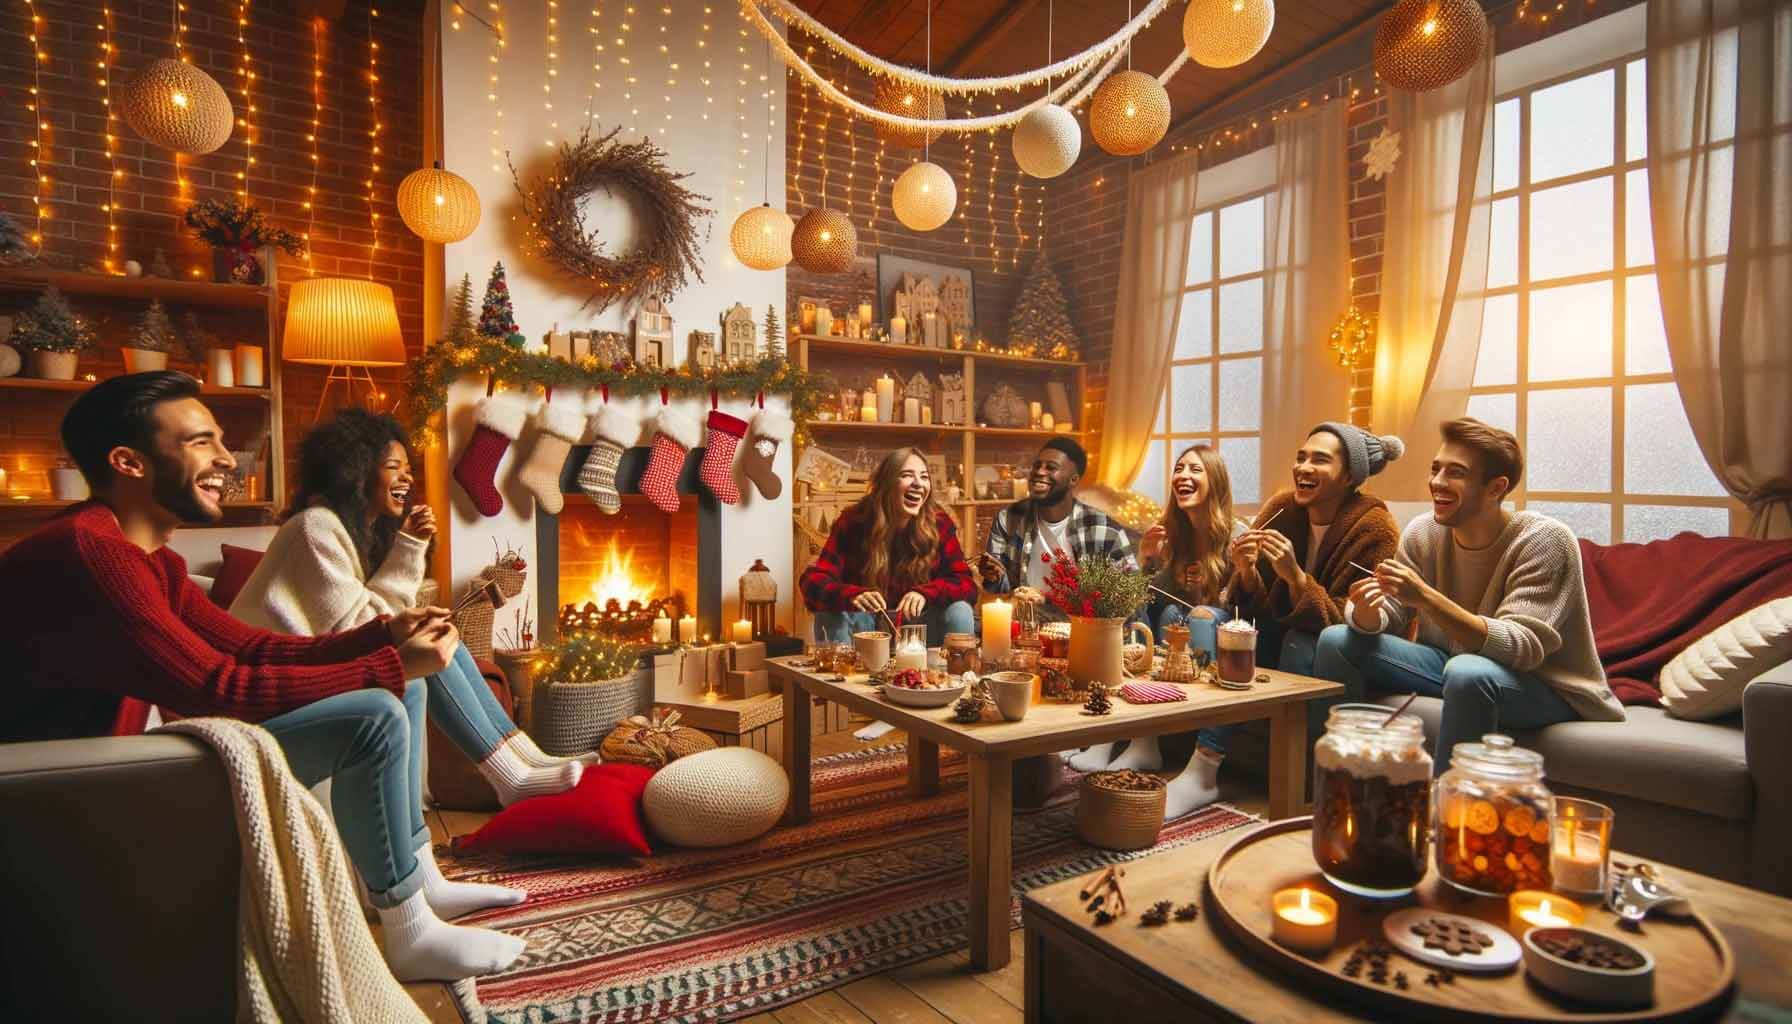 How to Host a Memorable Winter Party at Home?